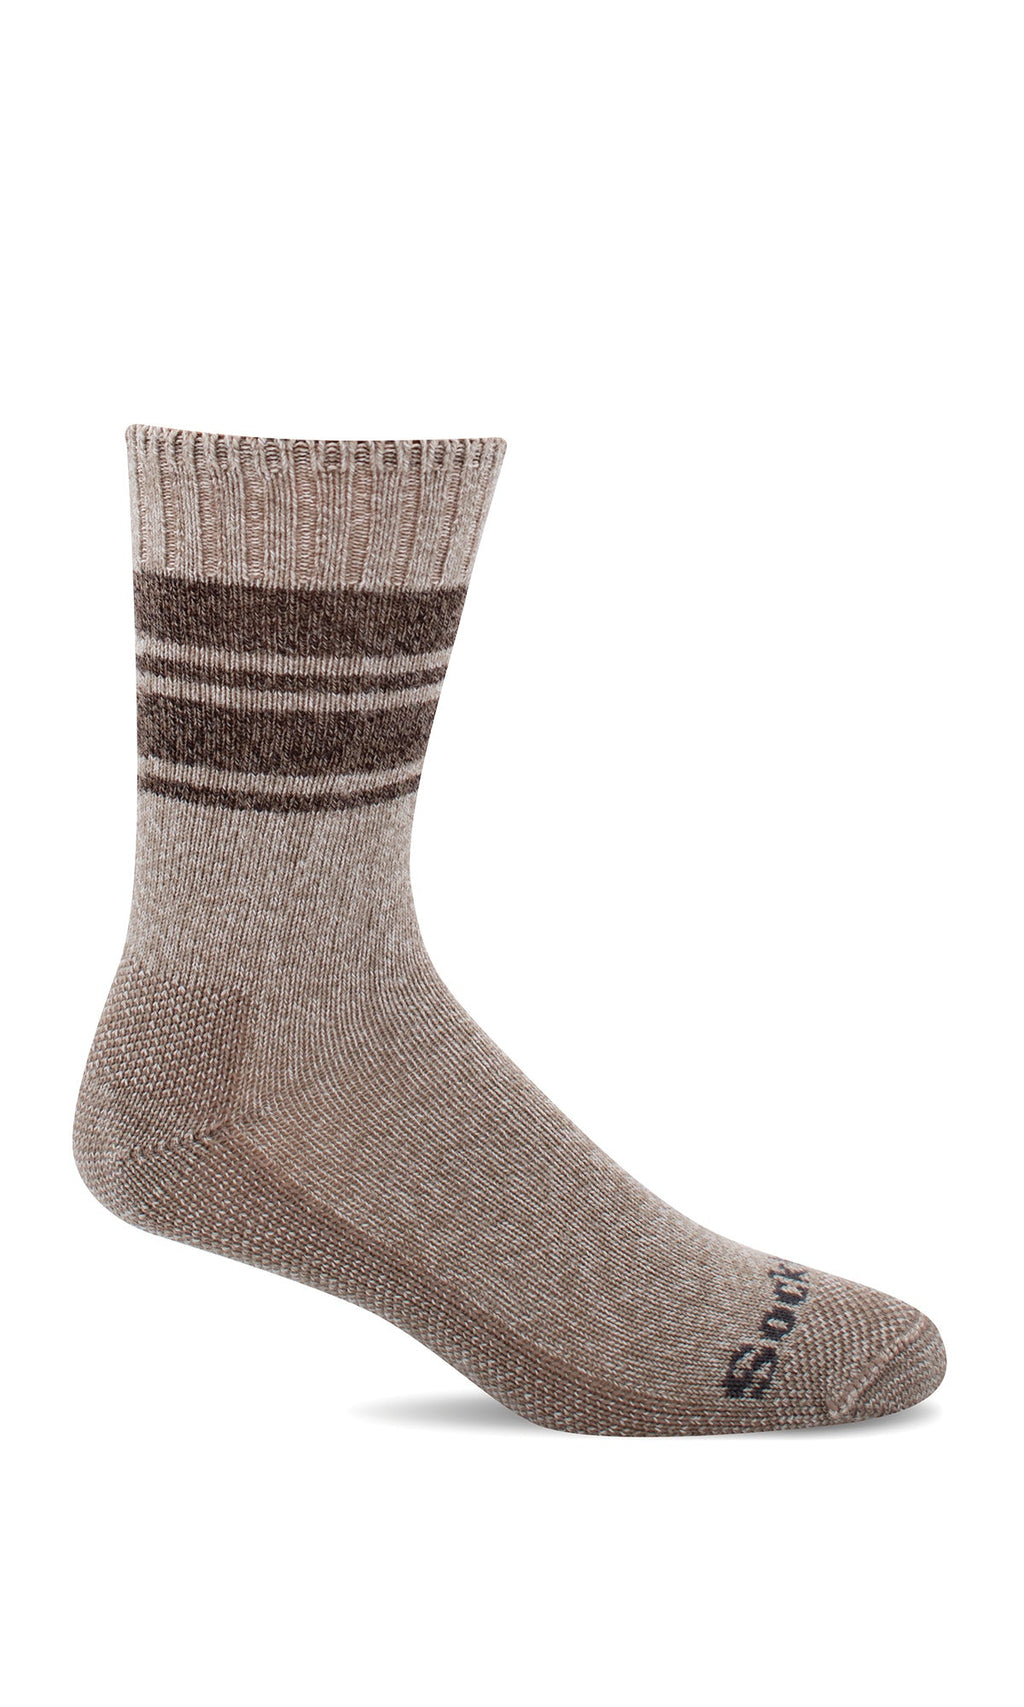 Men's At Ease | Relaxed Fit Socks - Merino Wool Relaxed Fit/Diabetic Friendly - Sockwell